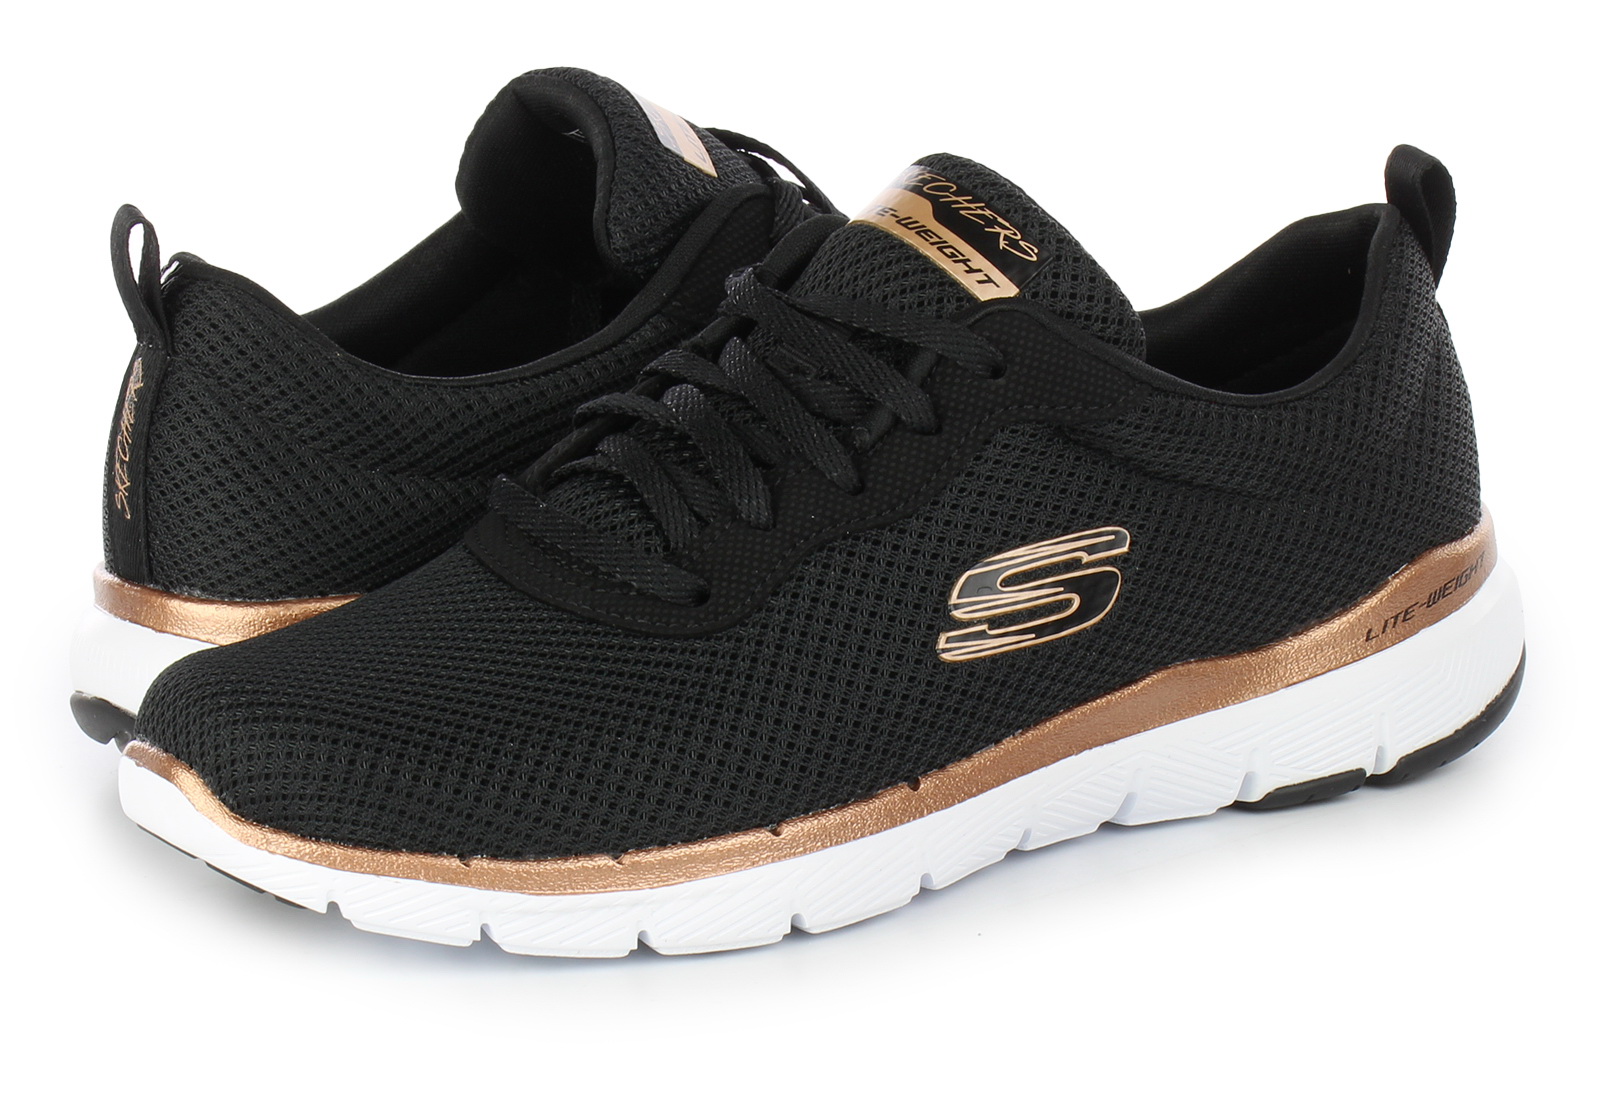 Skechers Sneakers Flex - First Insight - 13070-BKRG - Online shop for sneakers, shoes and boots